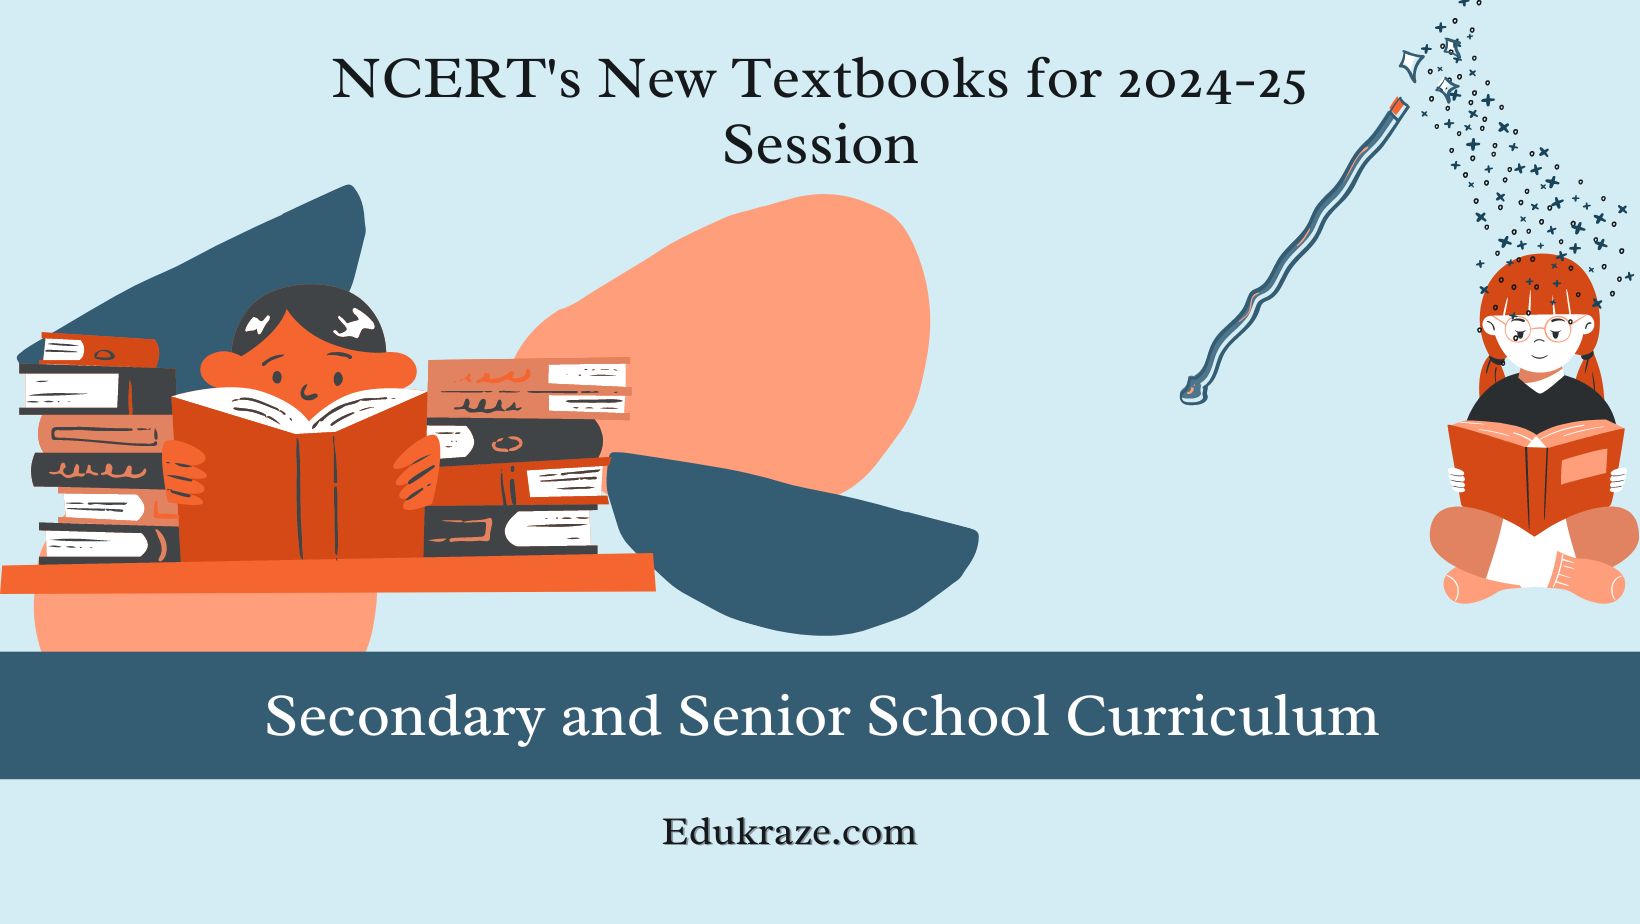 NCERT's New Textbooks for 2024-25 Session: Secondary and Senior School Curriculum